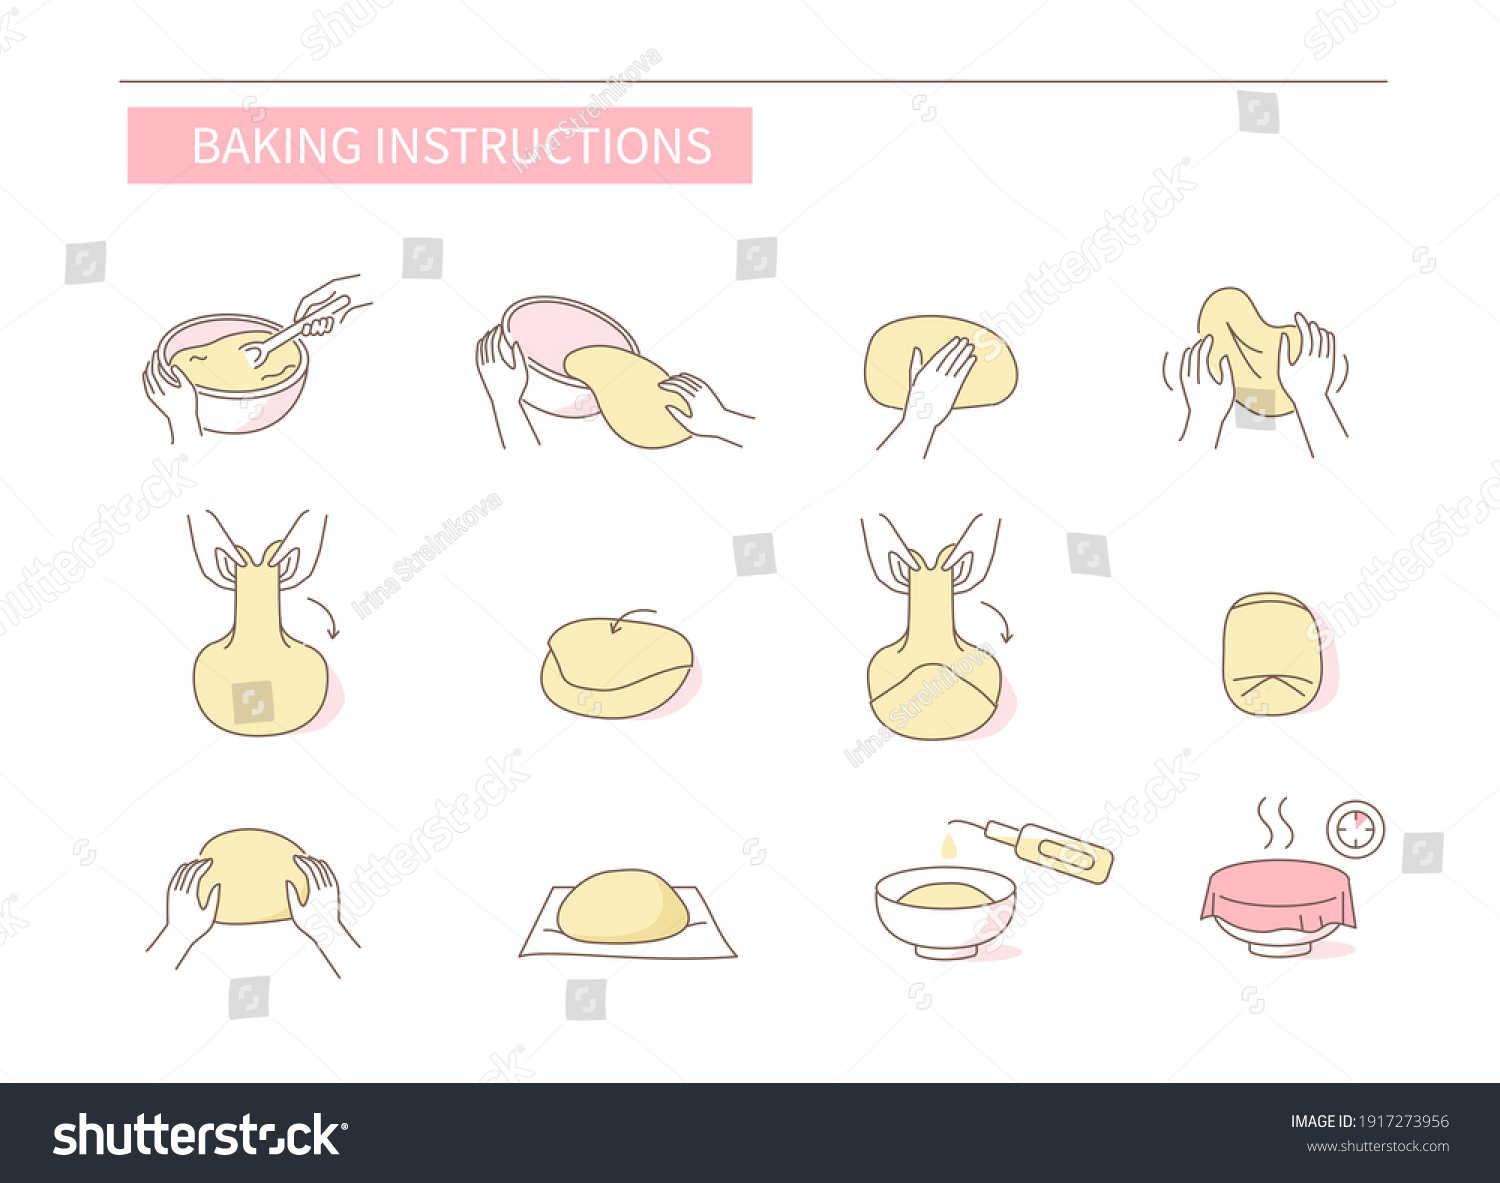 Instruction How to Prepare and Cook Dough for Bakery. Baking Ingredients, Utensil and Food Preparation Symbols. Dough Flour Recipe. Flat Vector Illustration and Icons set. #1917273956